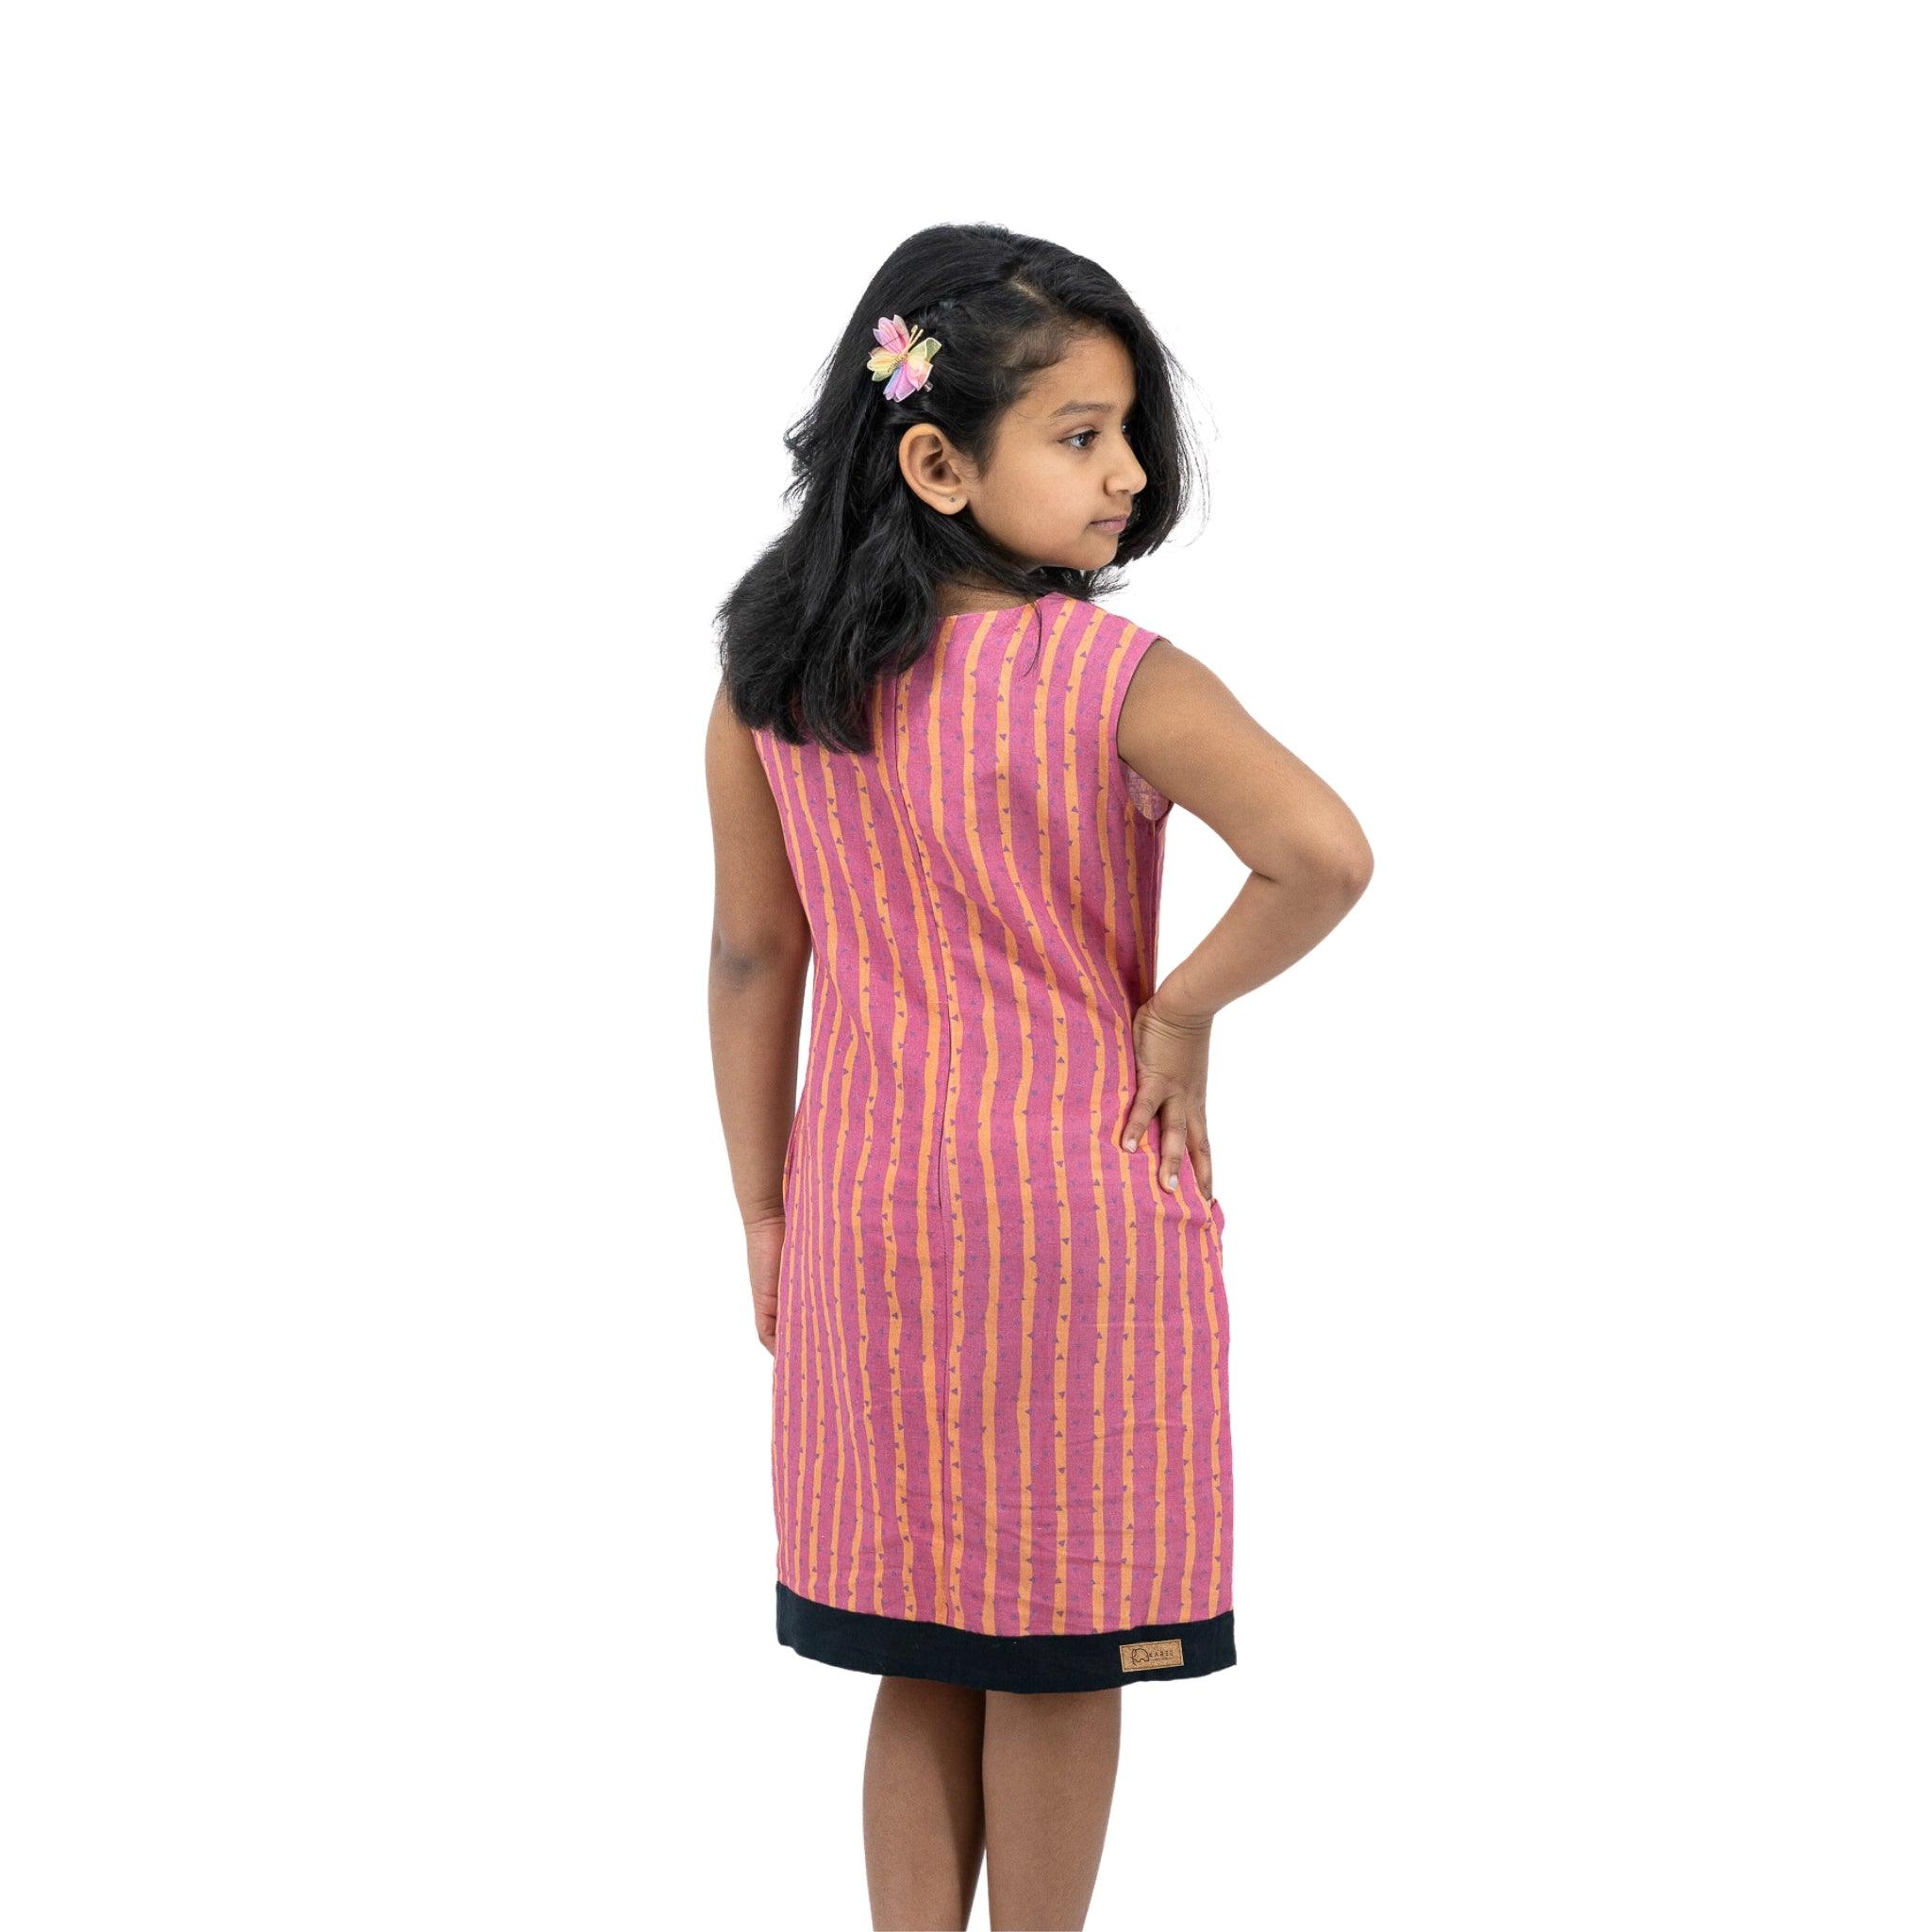 A girl in a Karee Linen Cotton Round Neck Frock for Kids in Lilac Rose with black stripes.